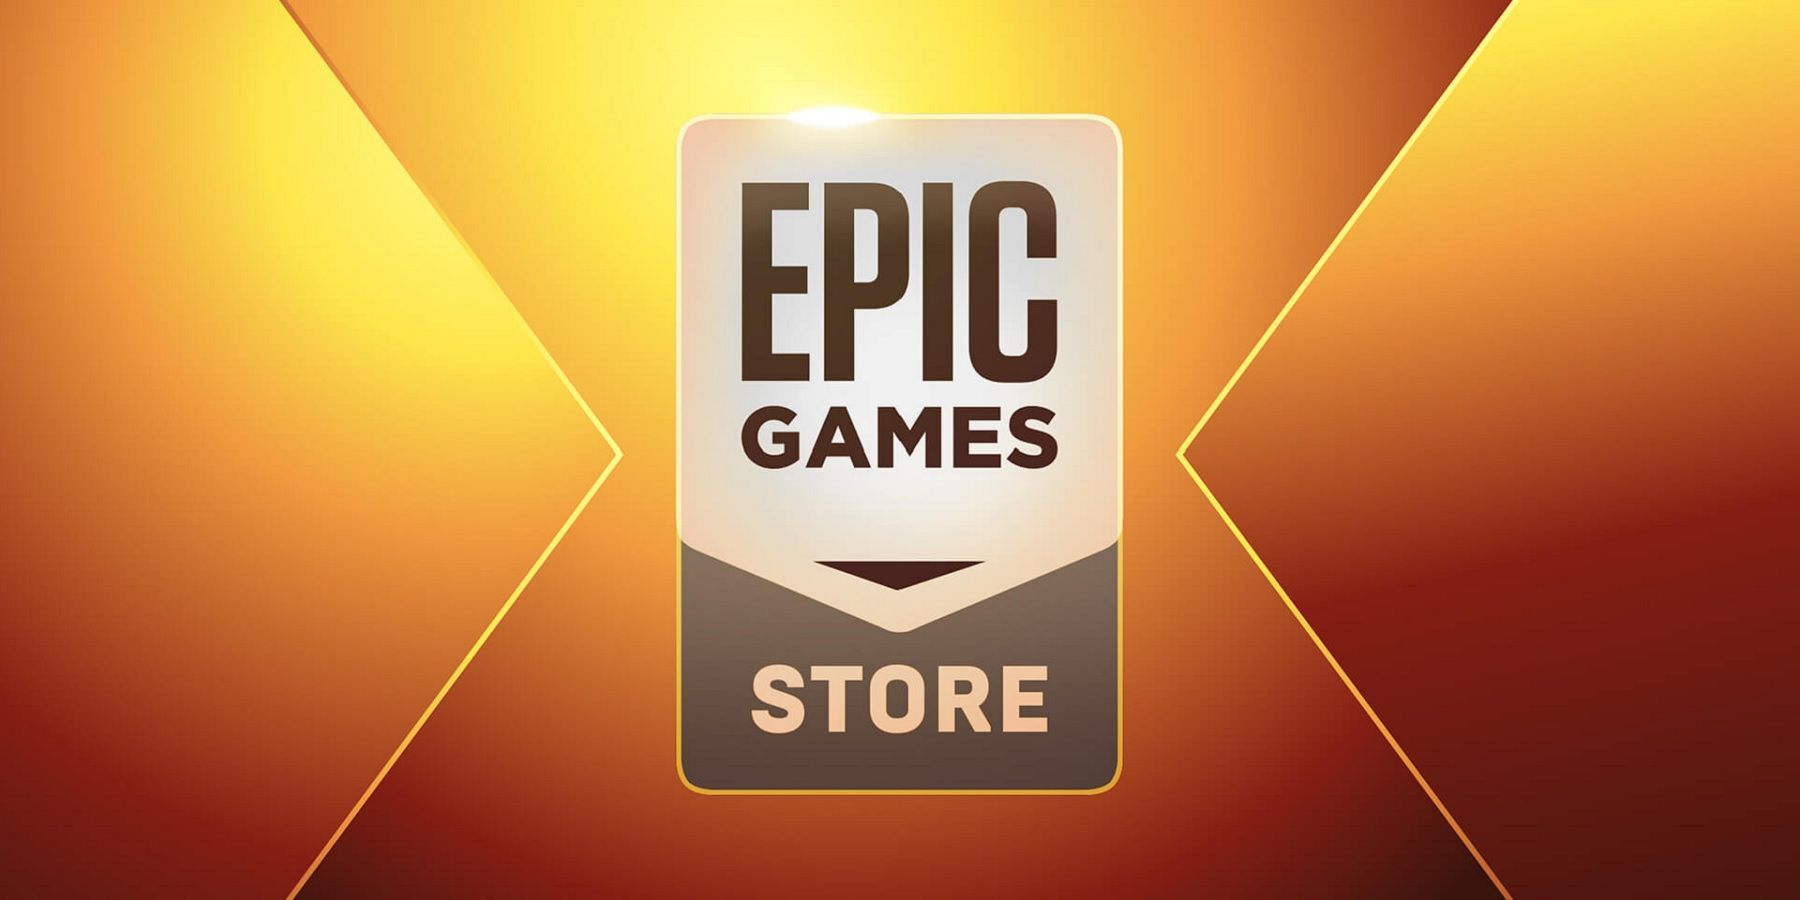 3 free games from the Epic Games Store until January 19, 2023 - News by  Xiaomi Miui Hellas